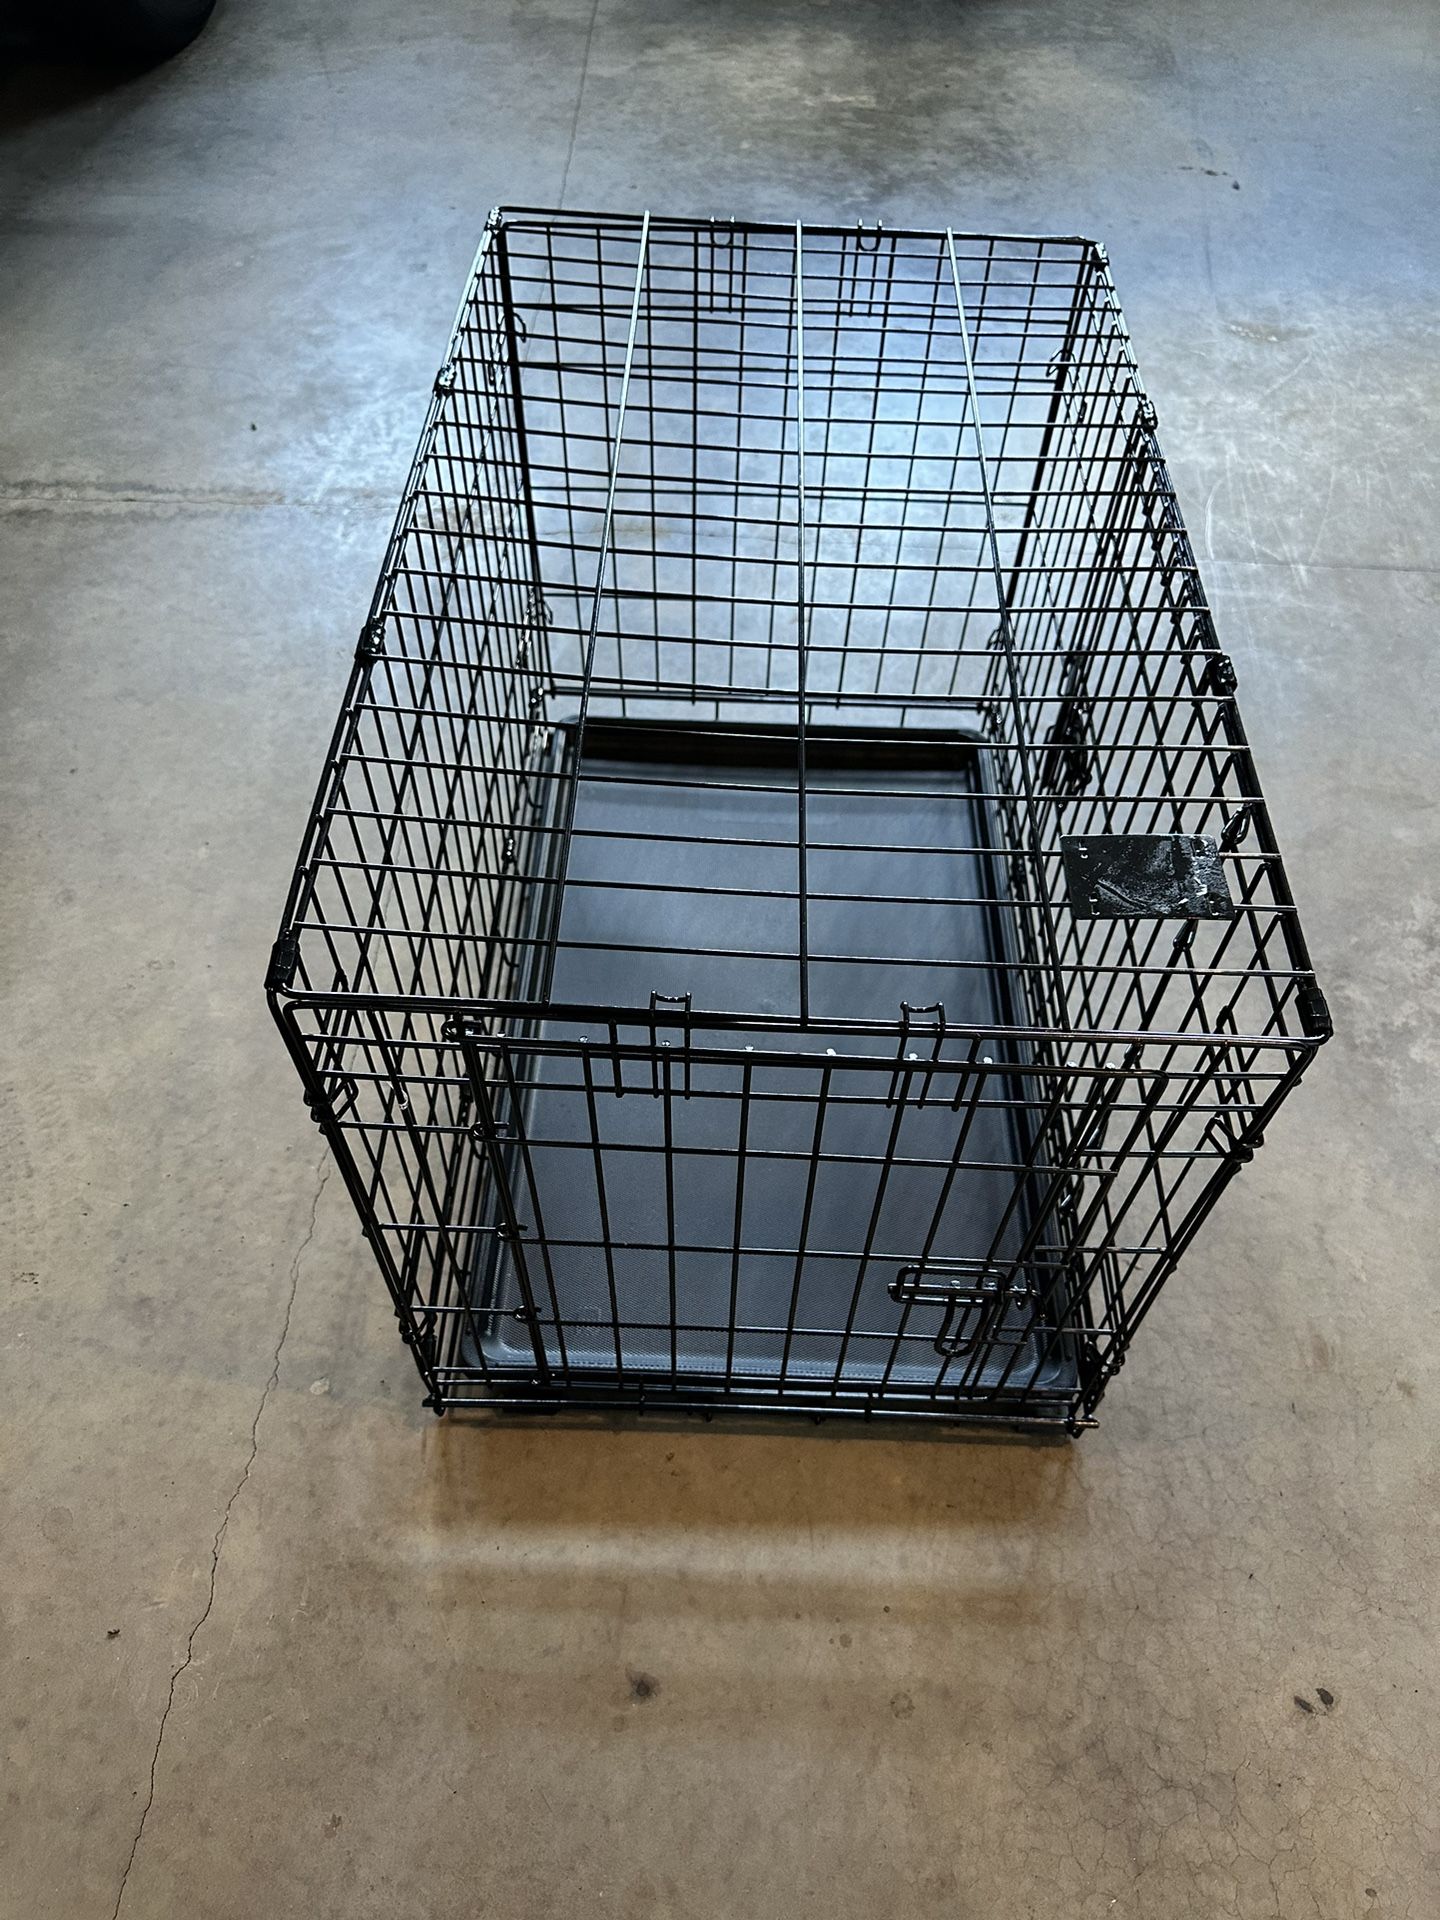 Xyxnxx - Collapsible Black Metal Dog Crate for Sale in Salunga, PA - OfferUp